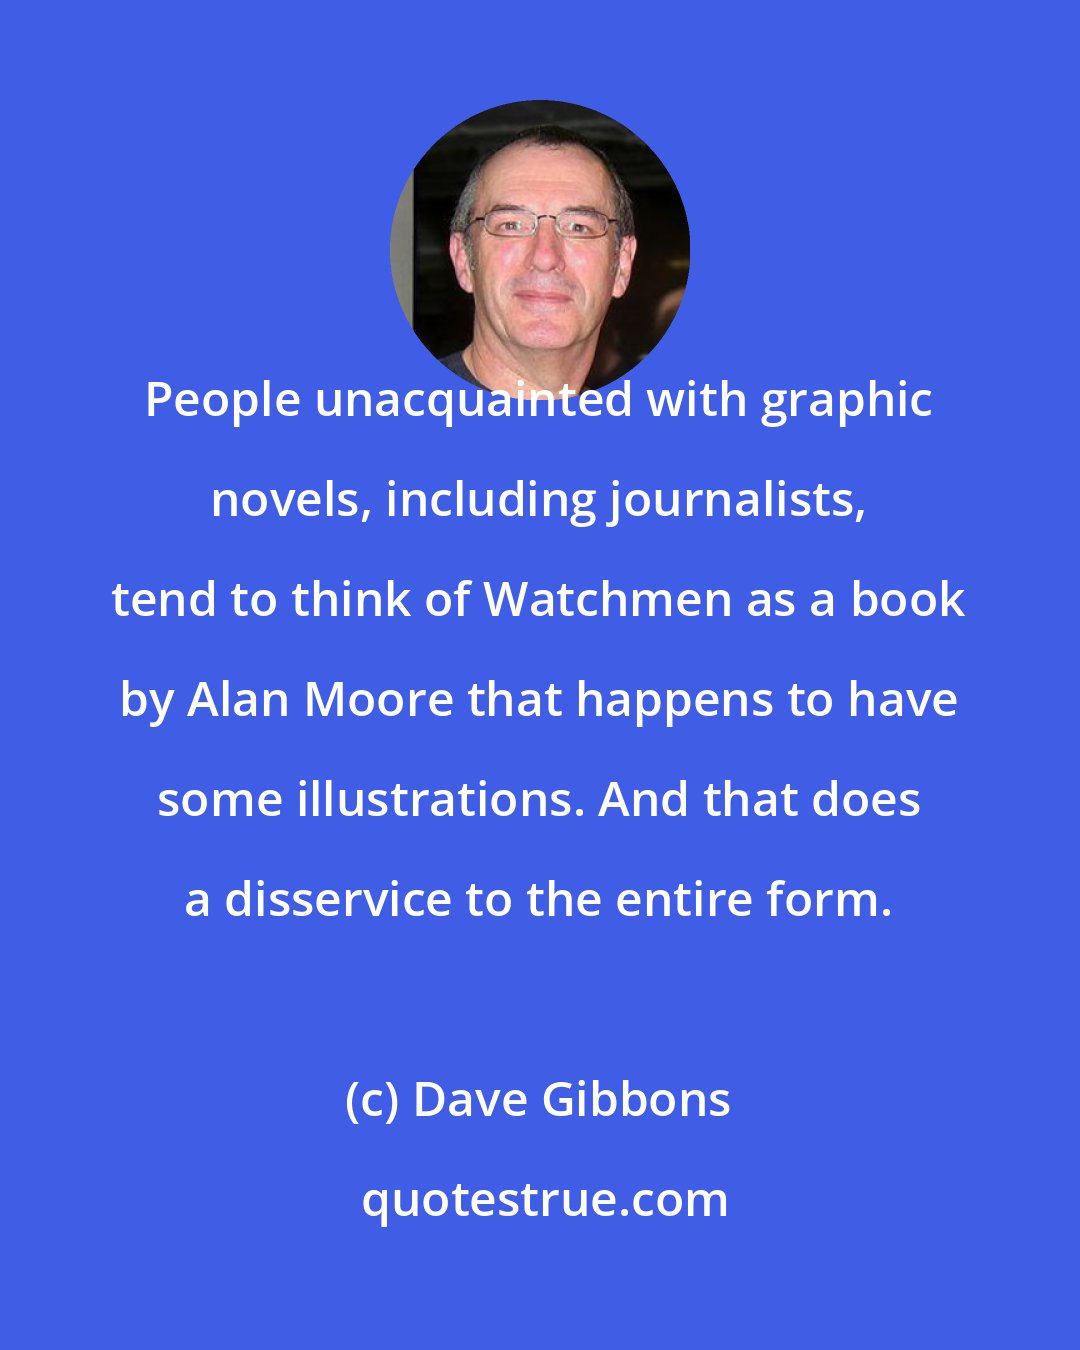 Dave Gibbons: People unacquainted with graphic novels, including journalists, tend to think of Watchmen as a book by Alan Moore that happens to have some illustrations. And that does a disservice to the entire form.